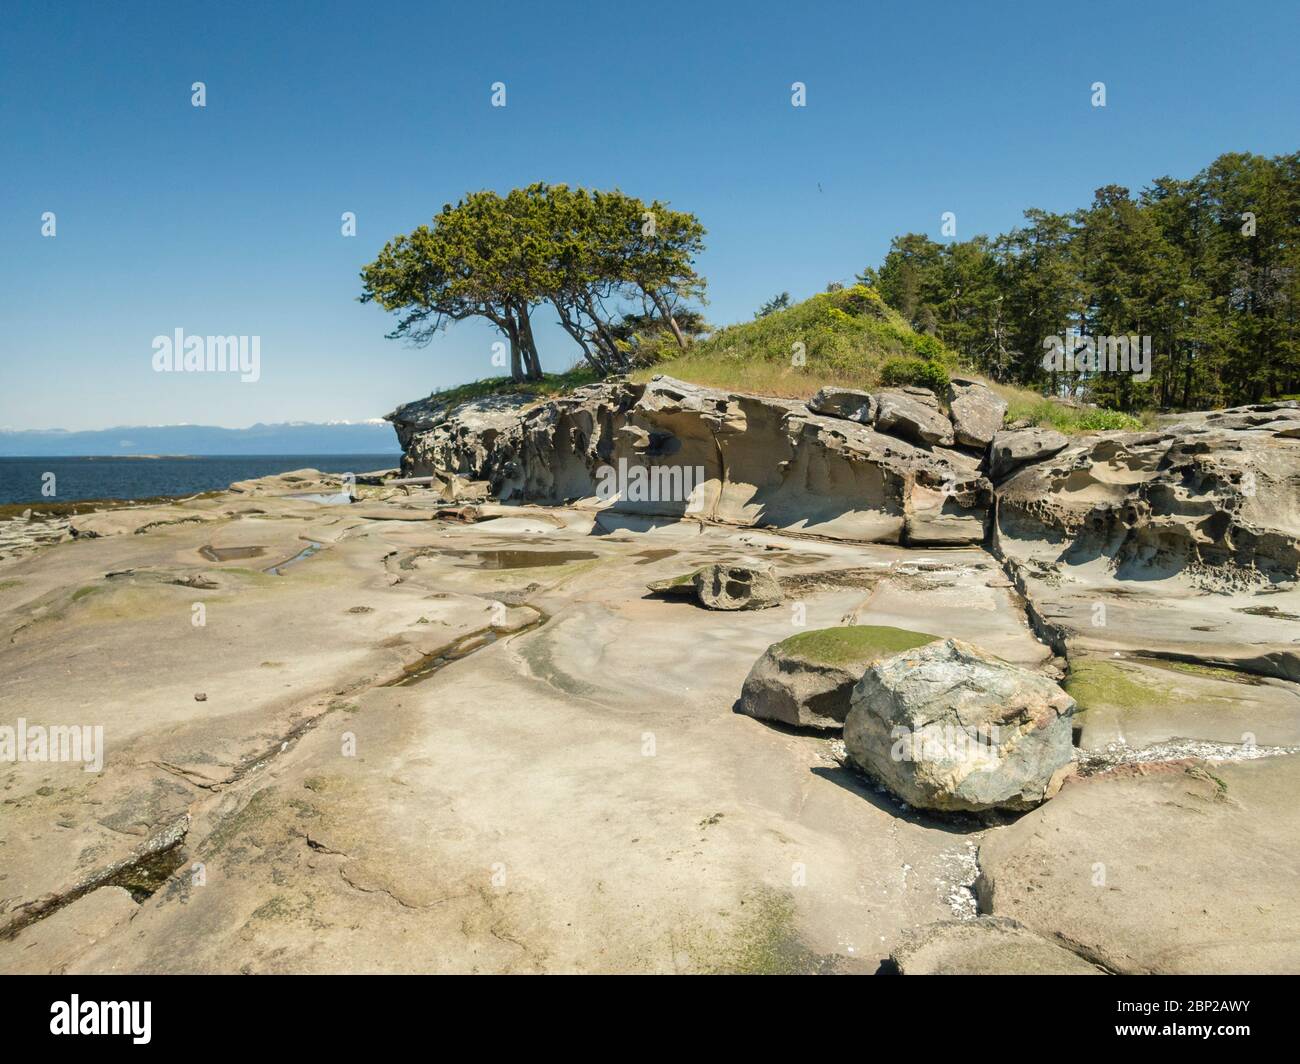 On an extreme low tide, a small, eroded islet in British Columbia's Flat Top Islands is surrounded by an expansive sandstone beach, normally submerged. Stock Photo